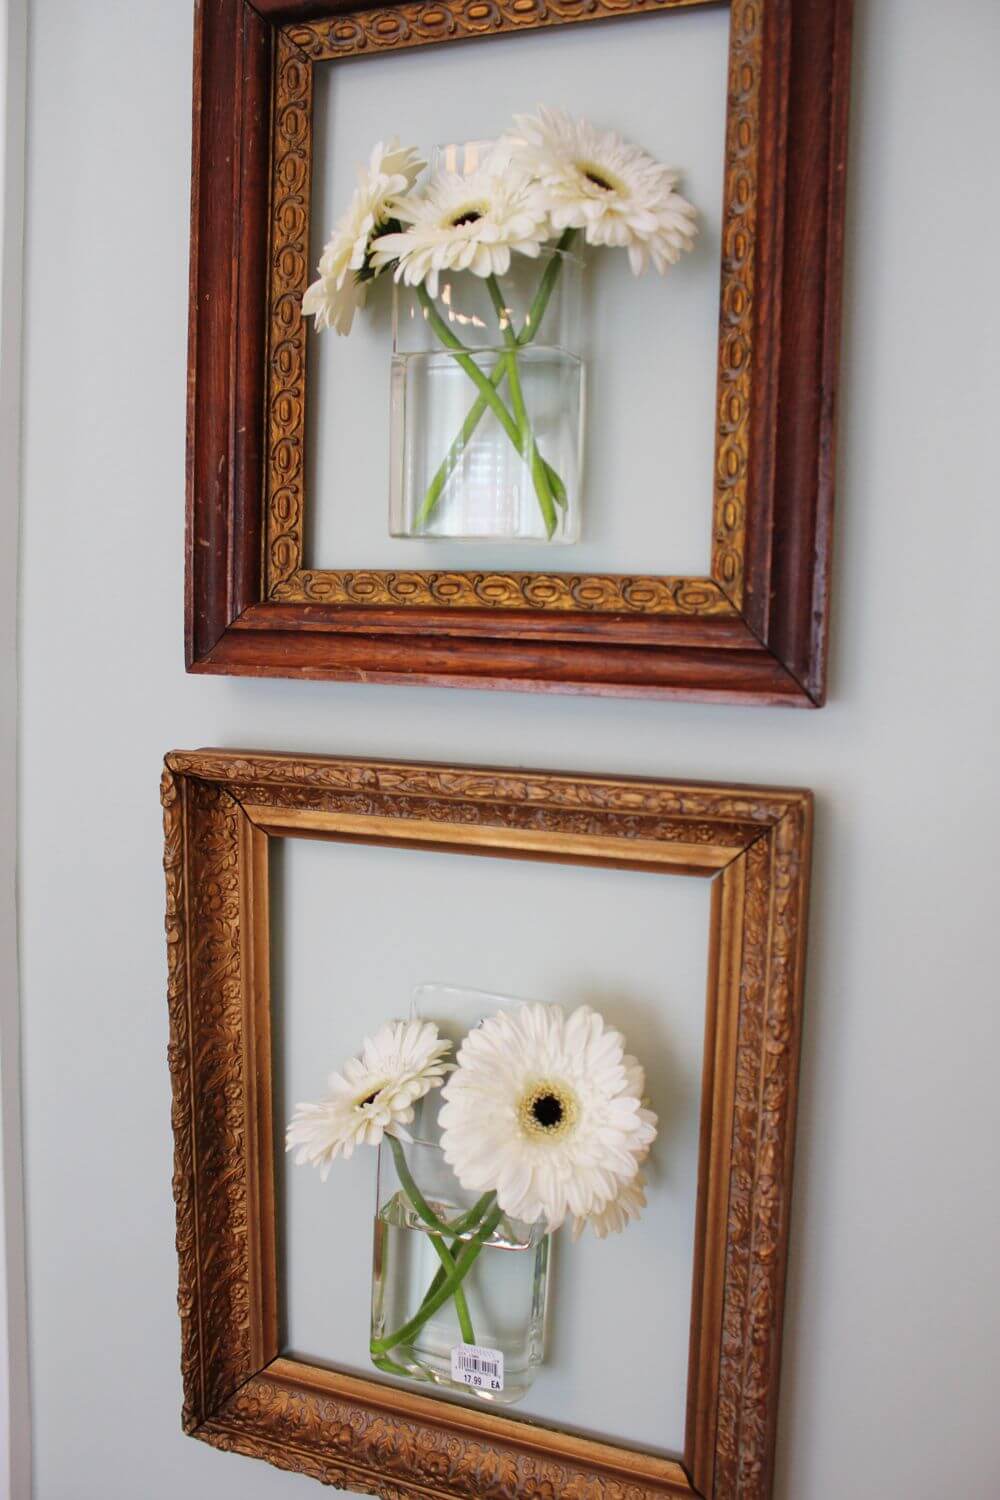 Two frames with flowers in them hanging on a wall
